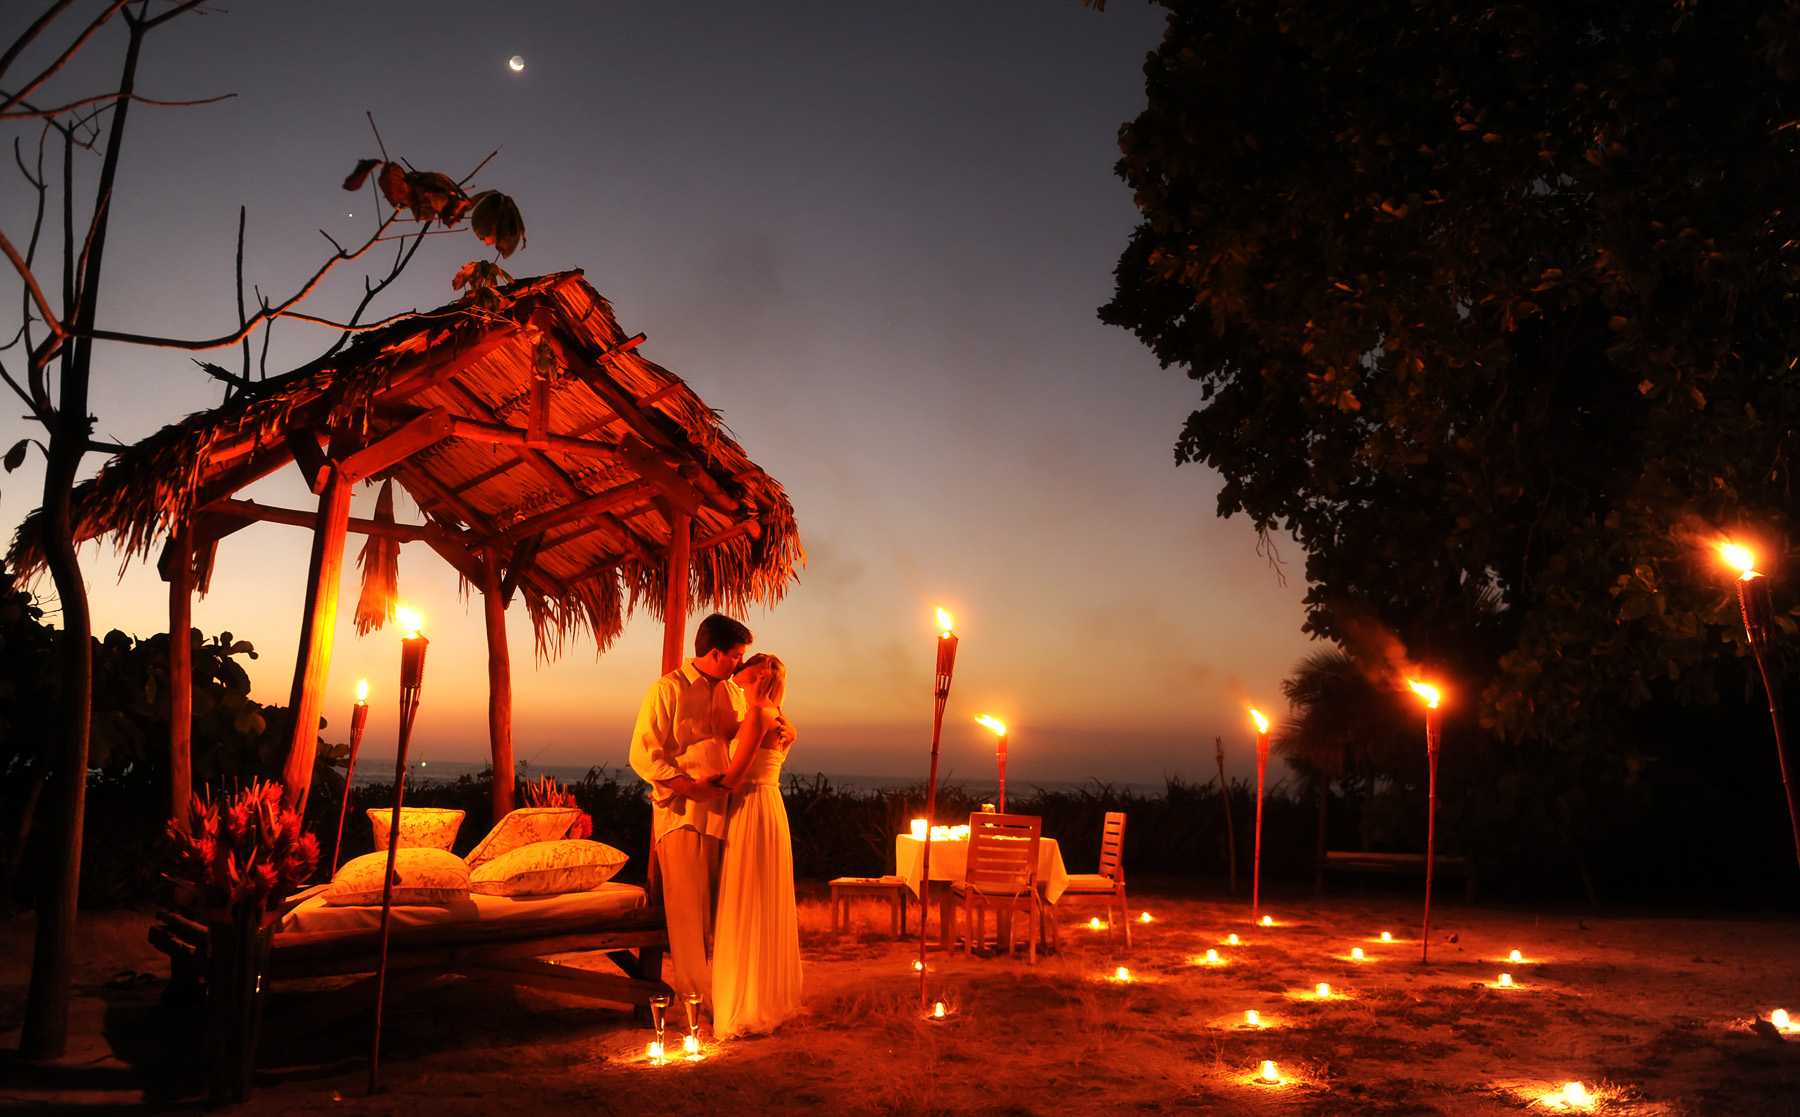 A newly wed couple kissing at night illuminated by fire